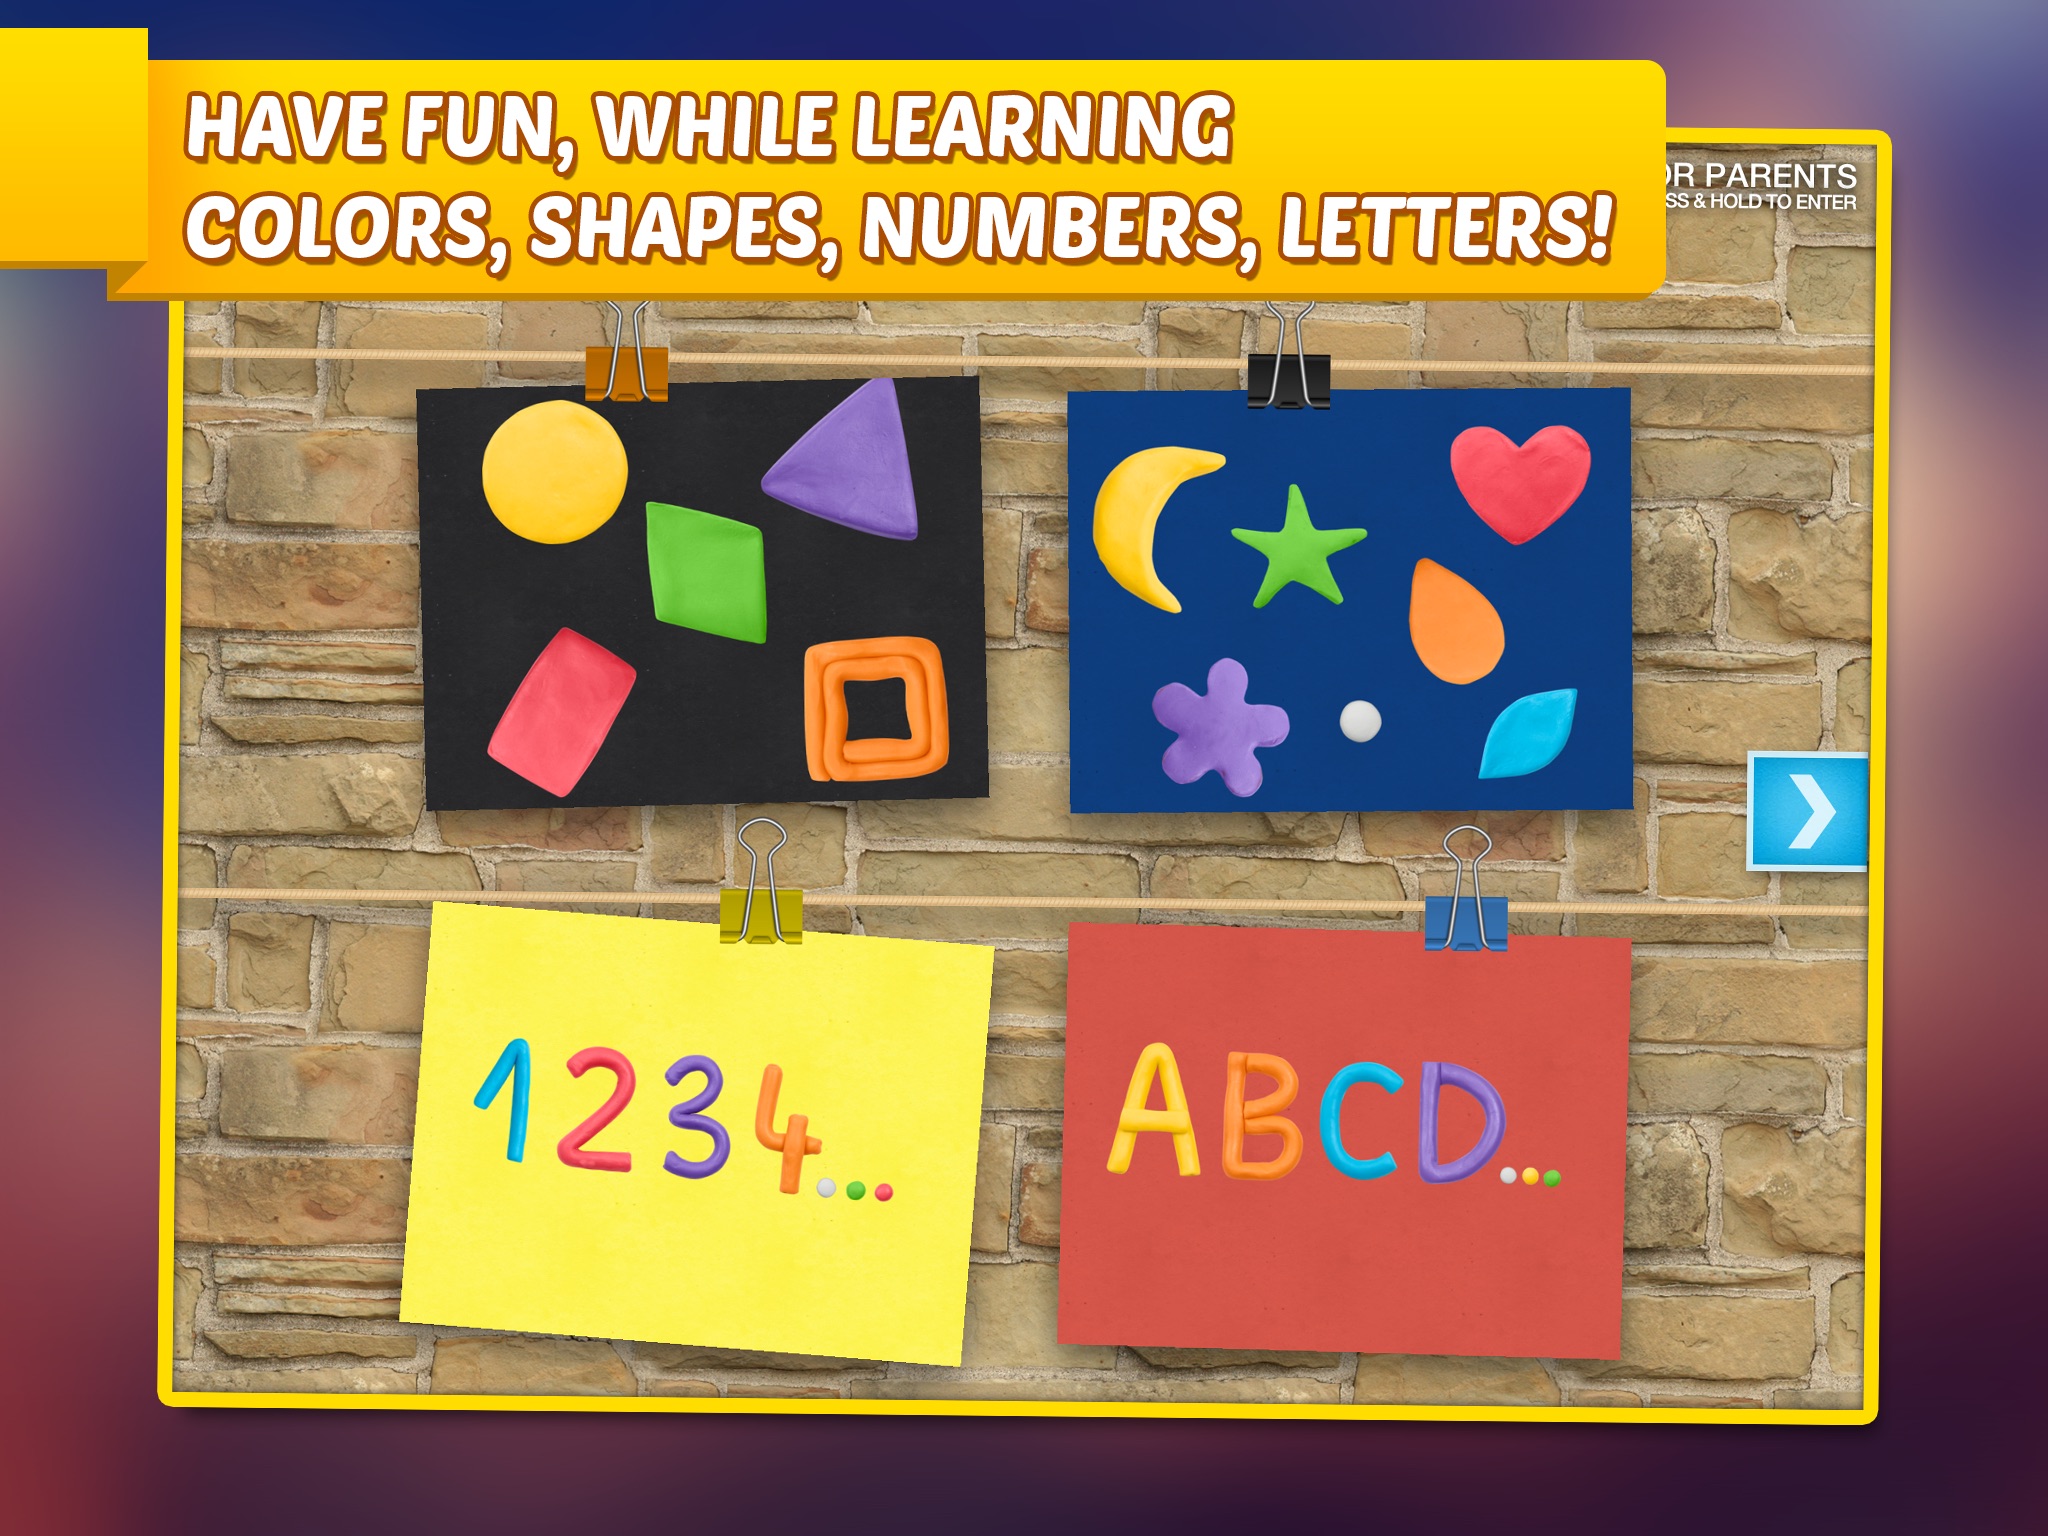 Imagination Box - creative fun with play dough colors, shapes, numbers and letters screenshot 3